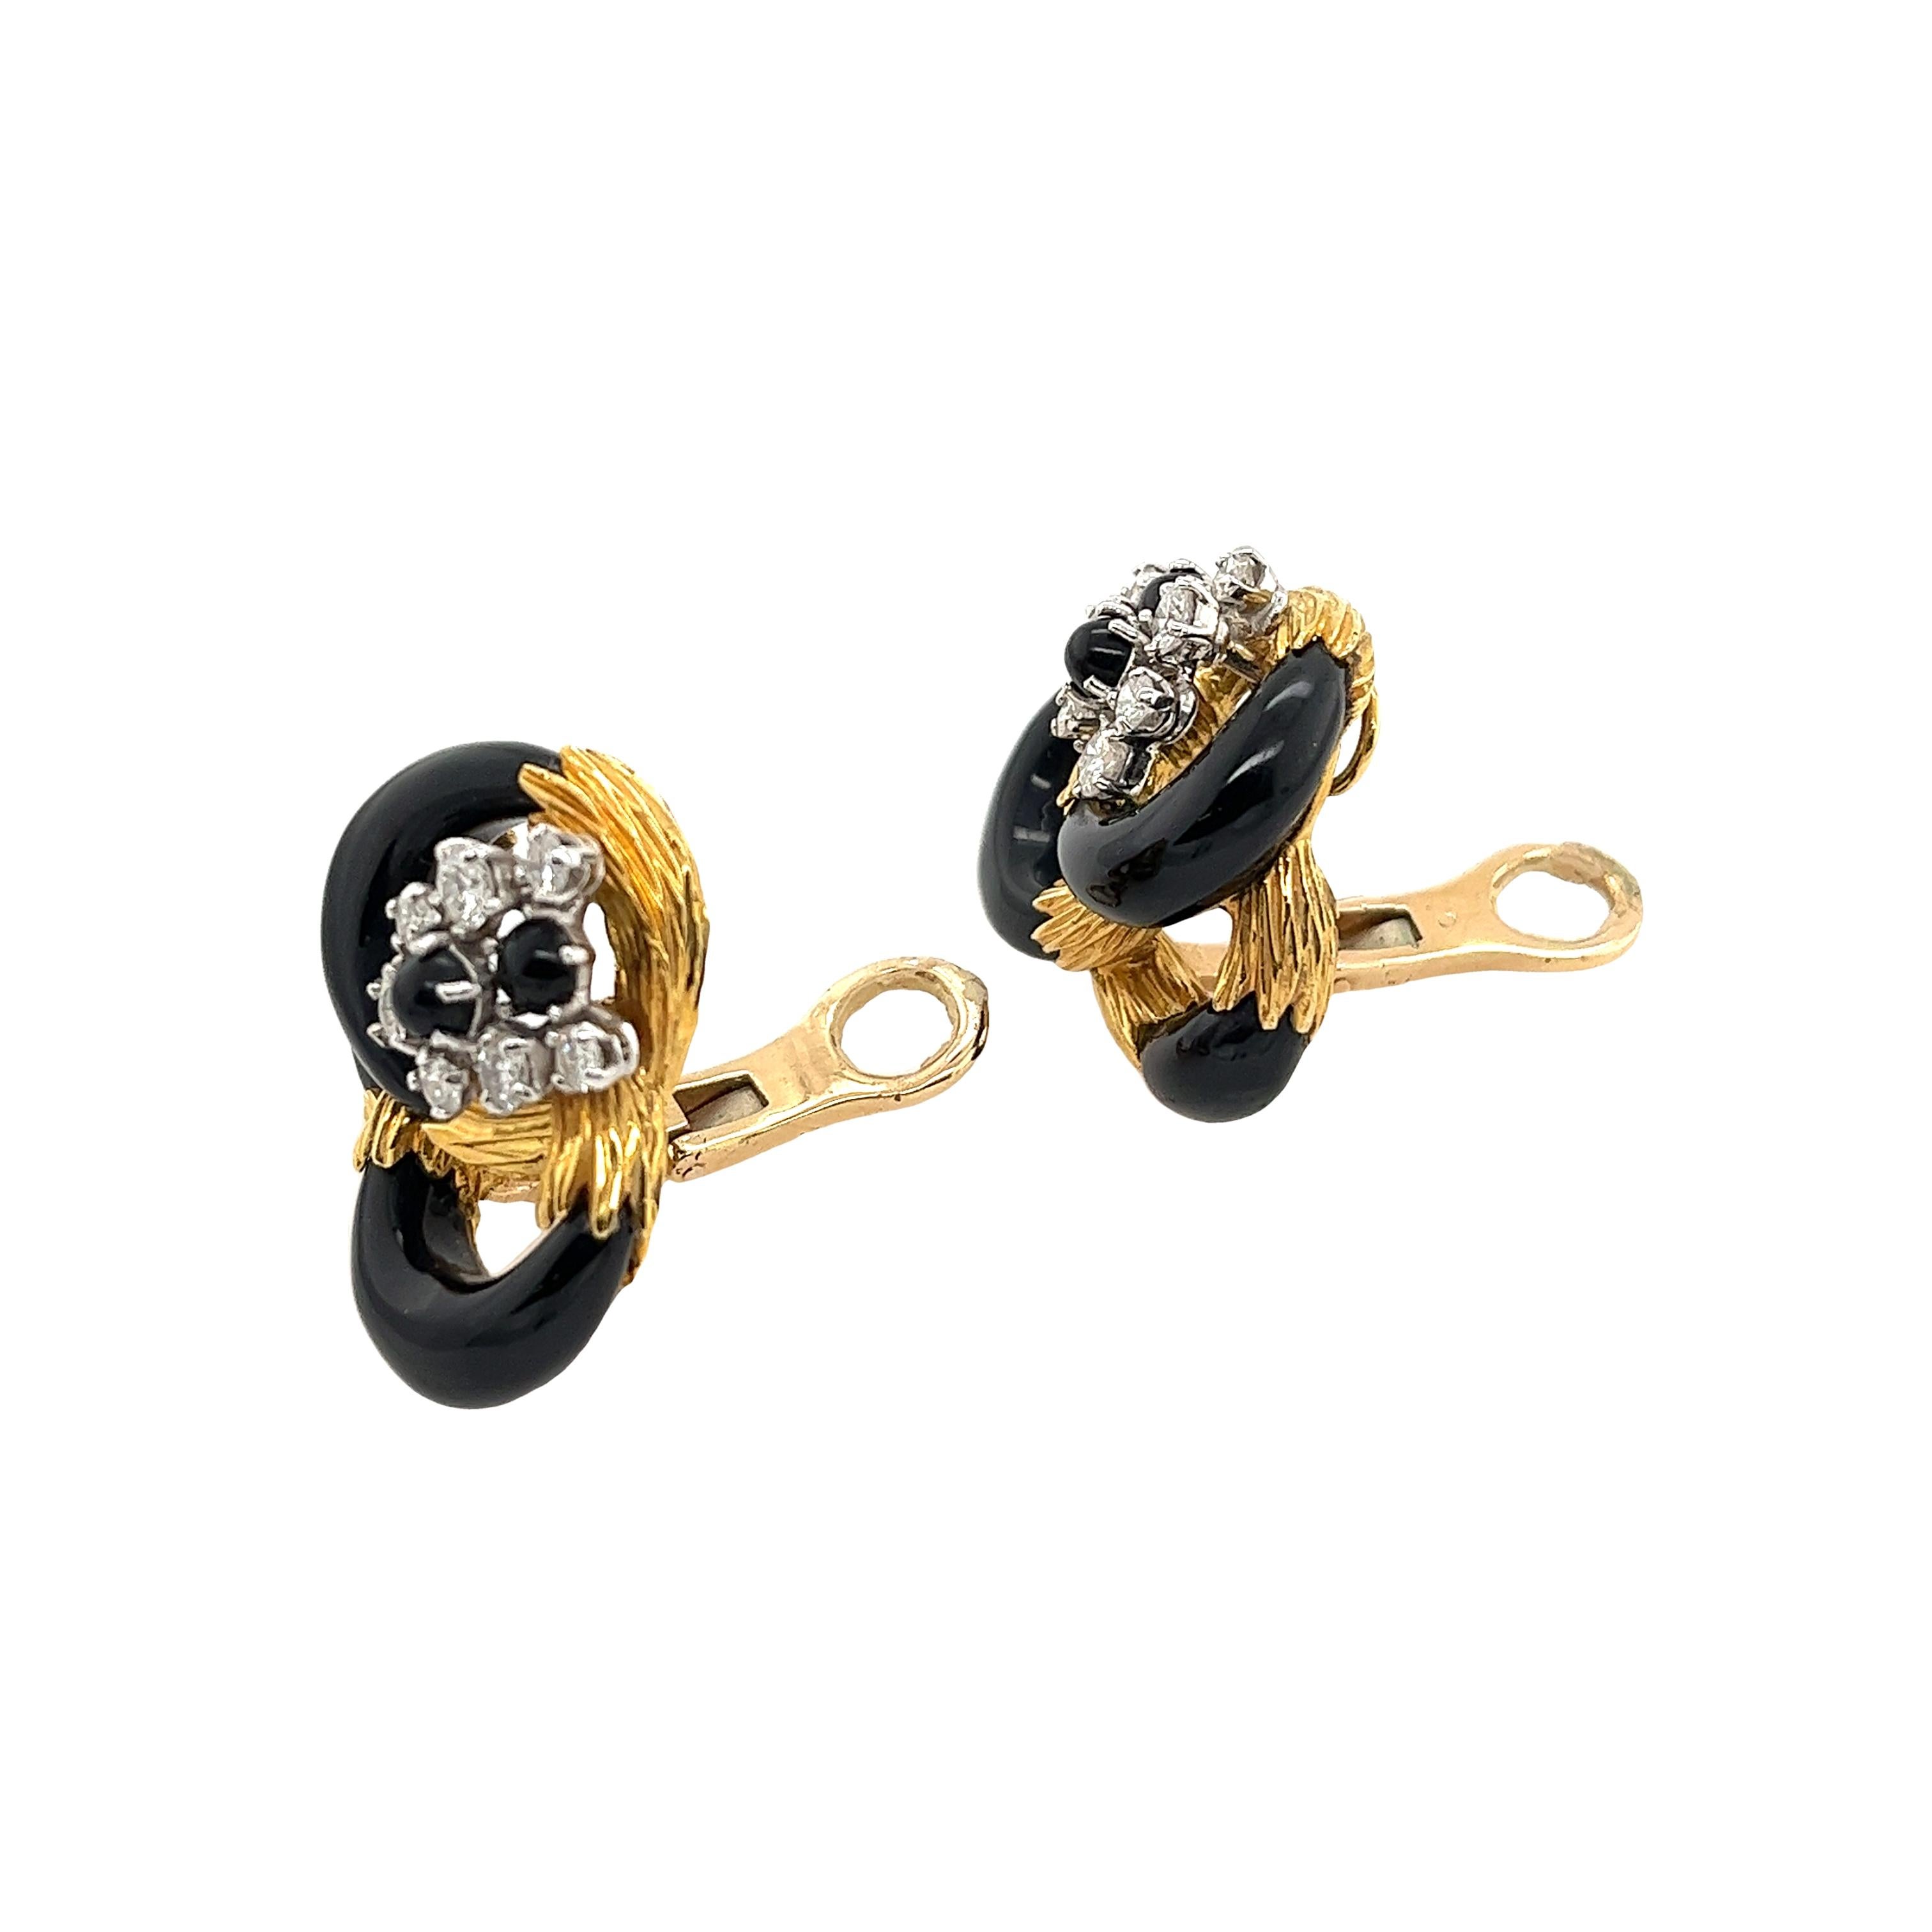 Kutchinsky Vintage Diamond Earrings Black Enamel Set In 18ct Yellow Gold In Excellent Condition For Sale In London, GB